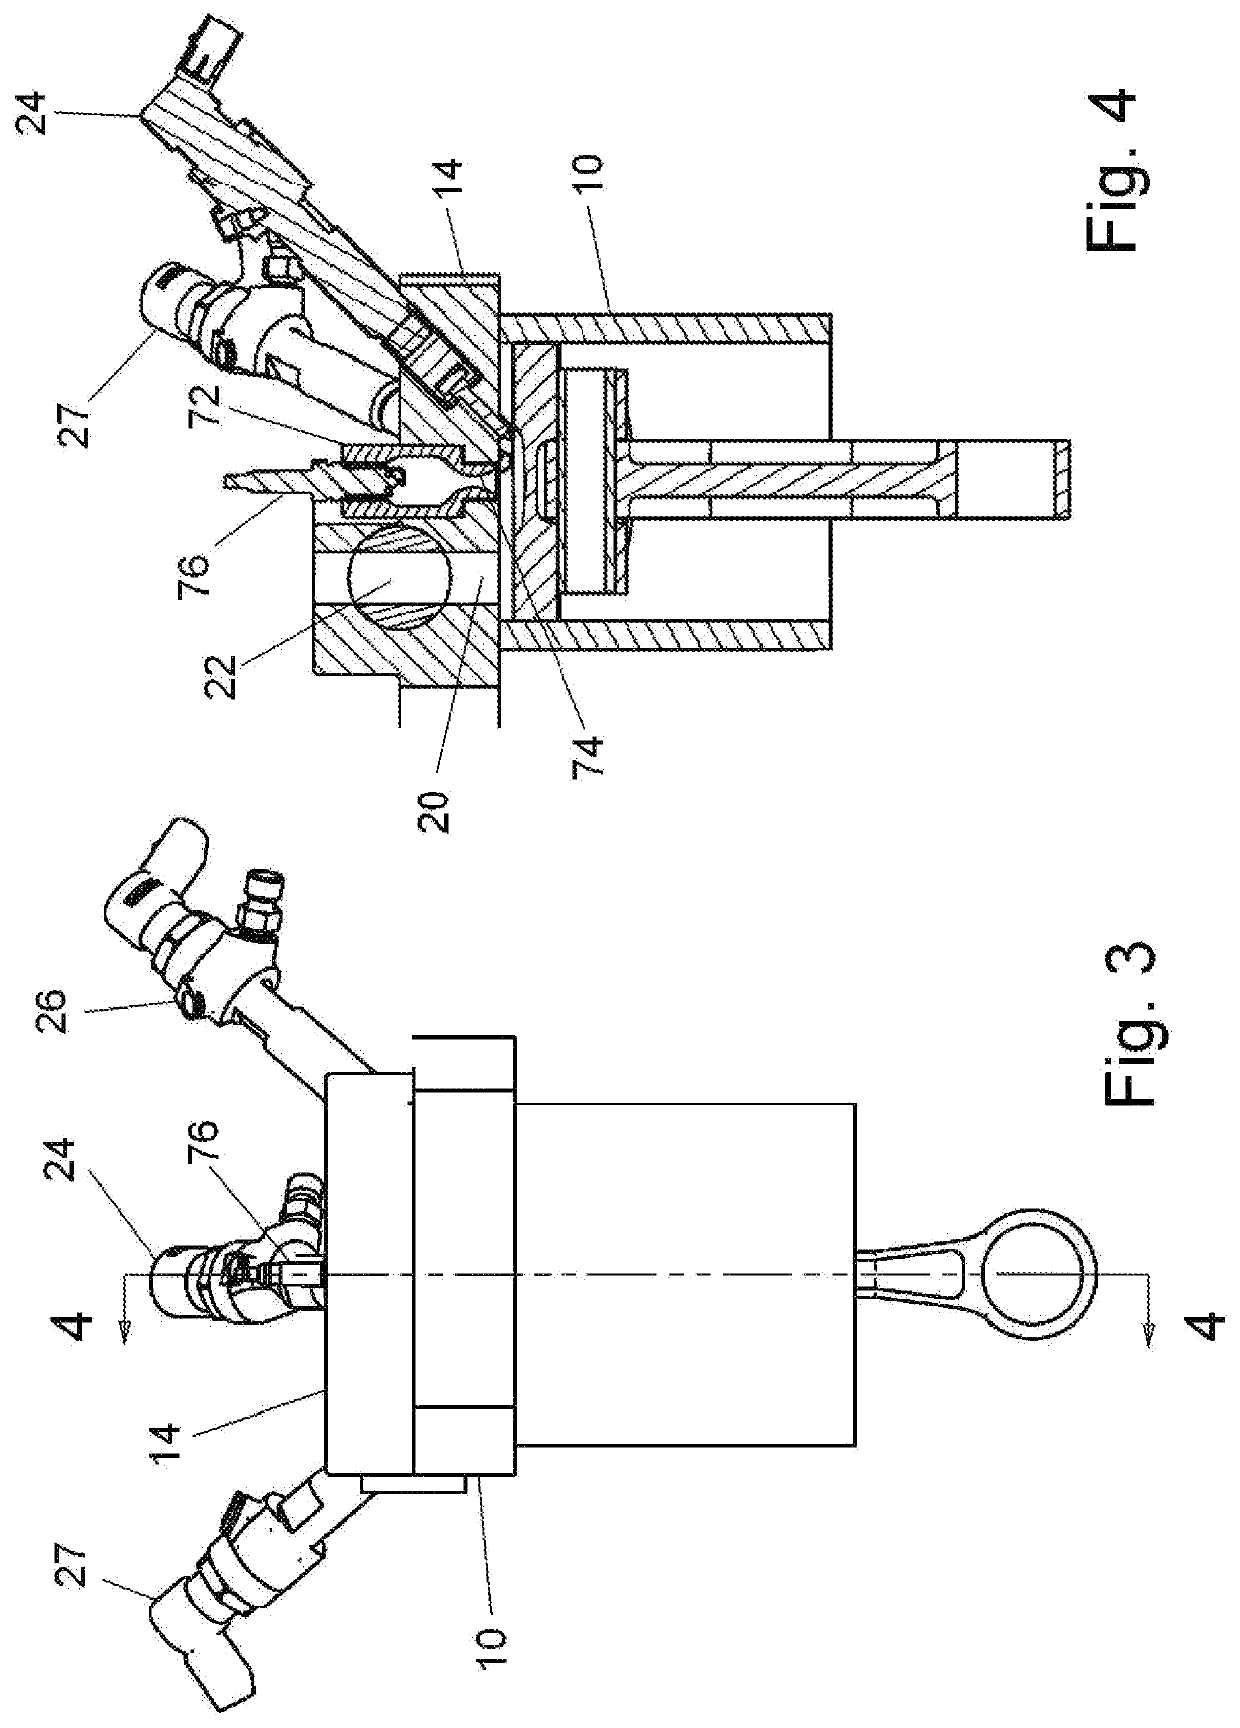 Power system with internal combustion engine